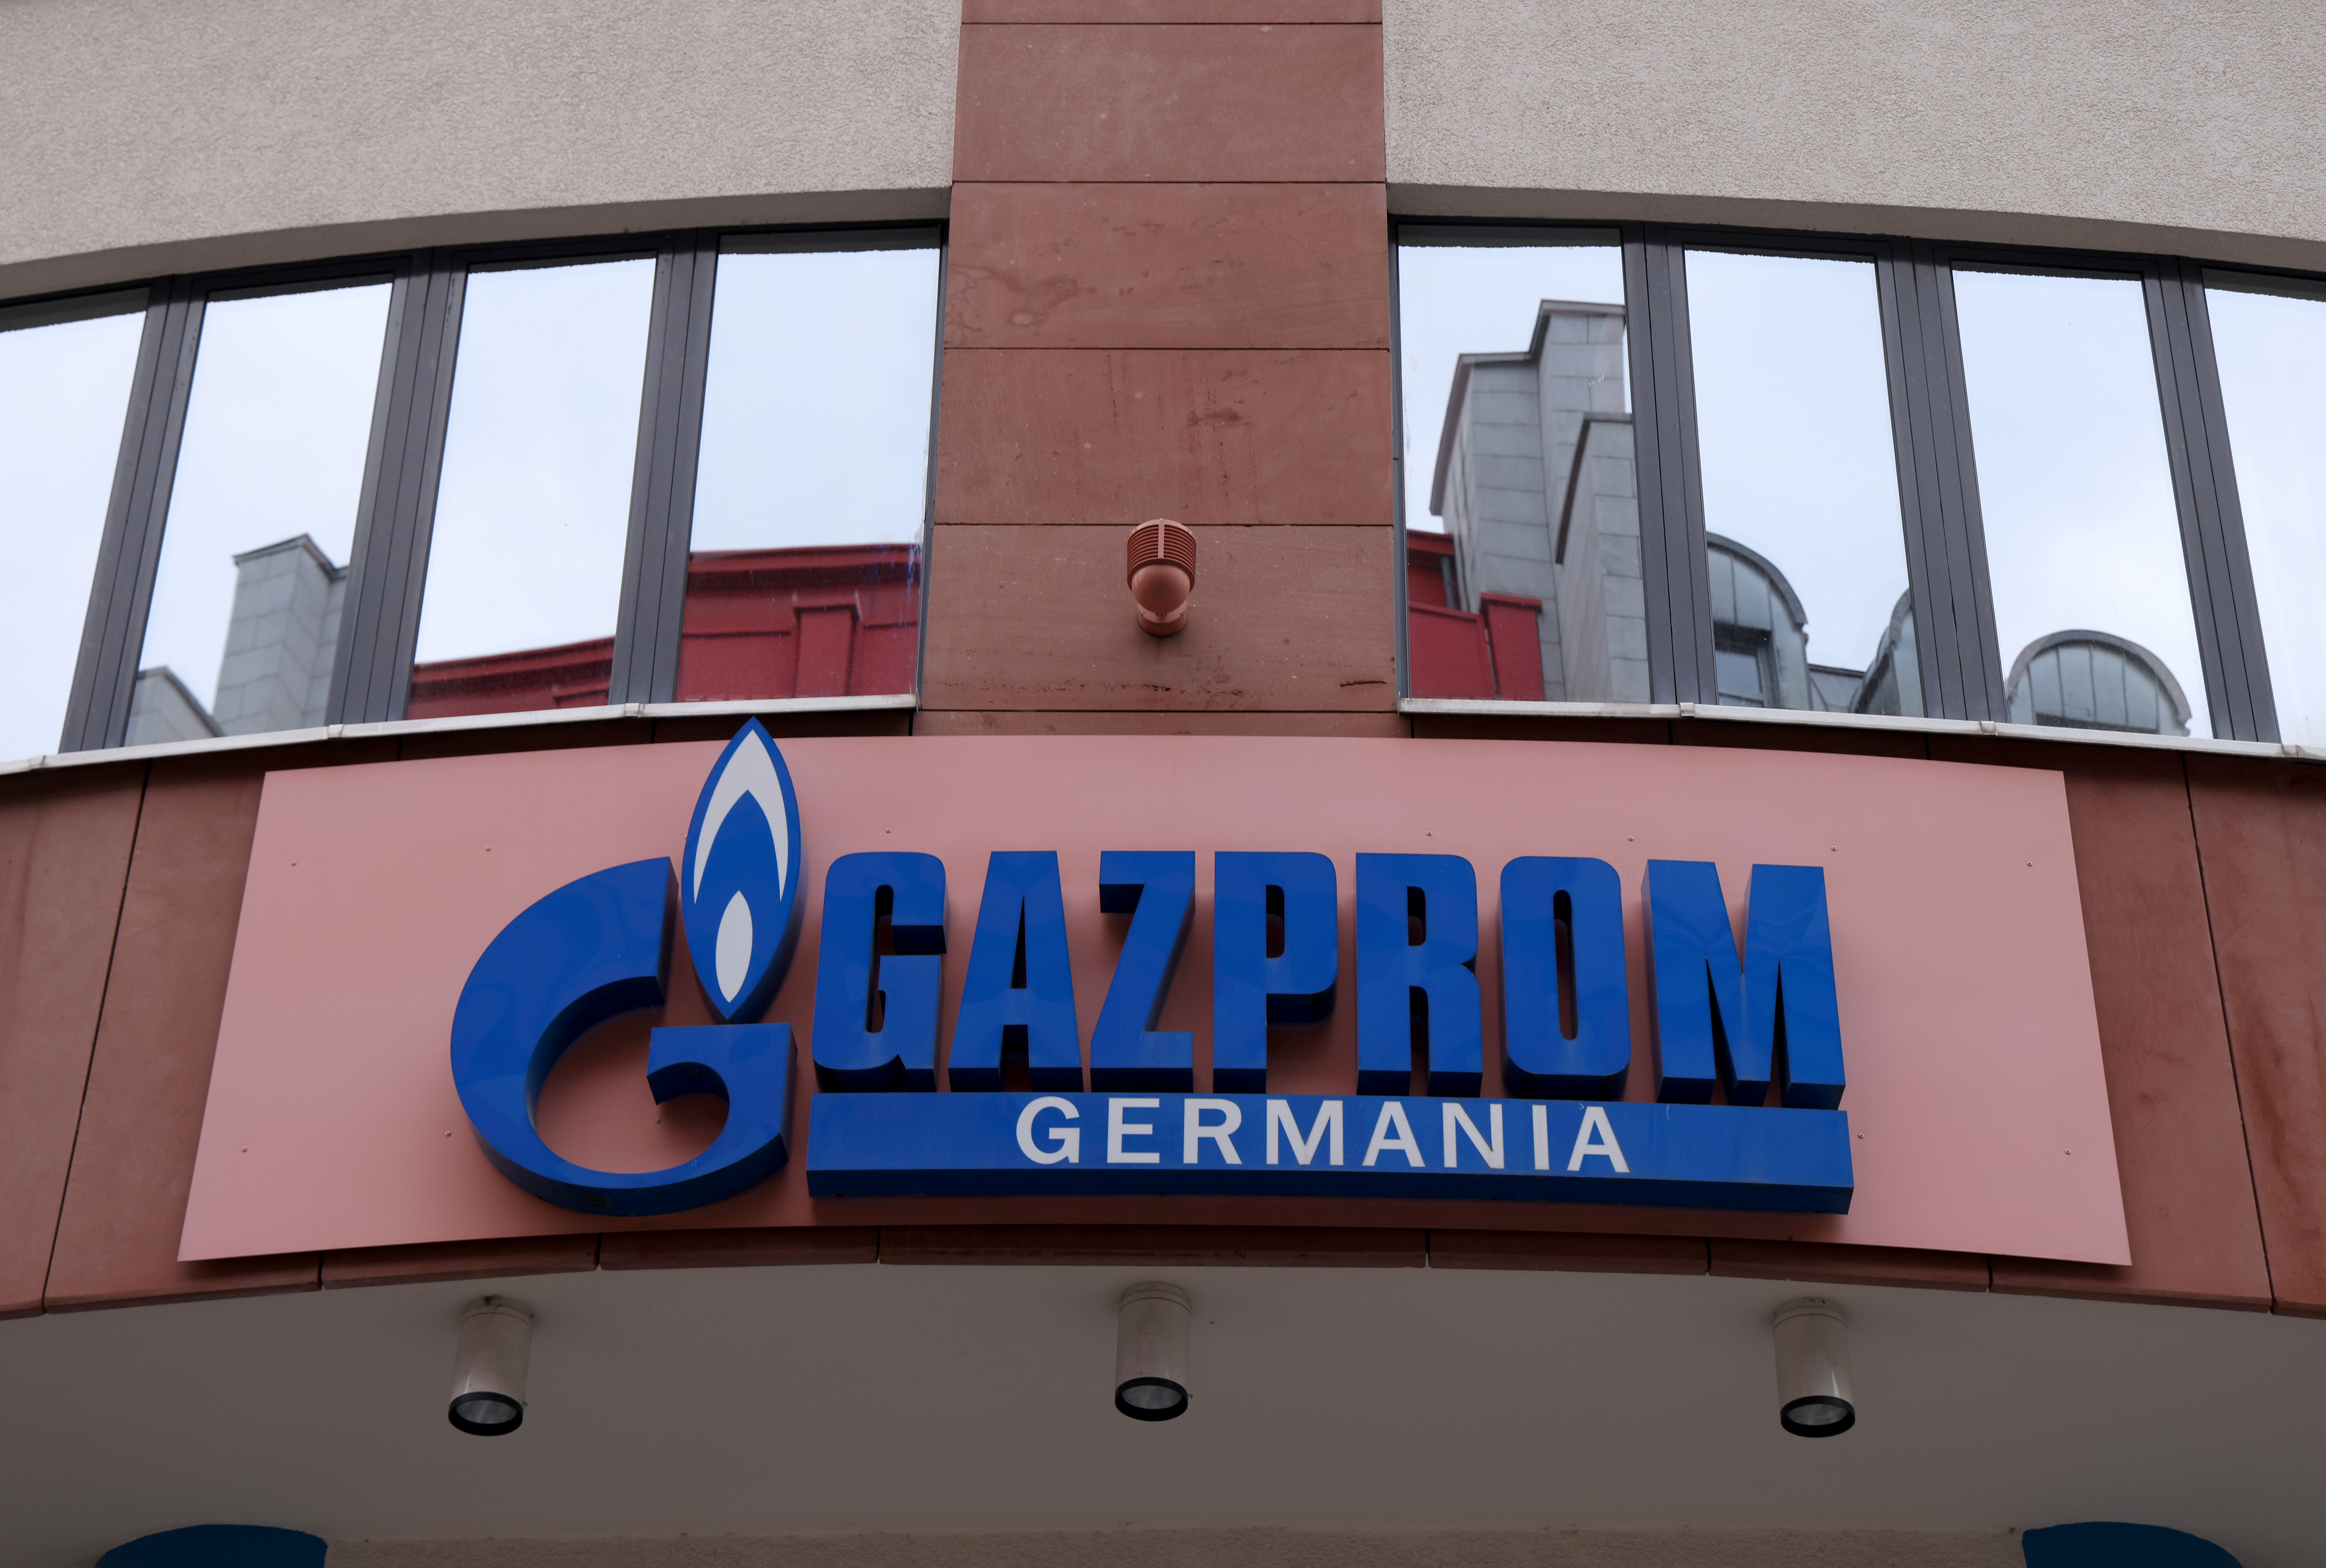 The corporate headquarters of Gazprom Germania, the German unit of Russian natural gas company Gazprom, stands on March 30 in Berlin, Germany. 